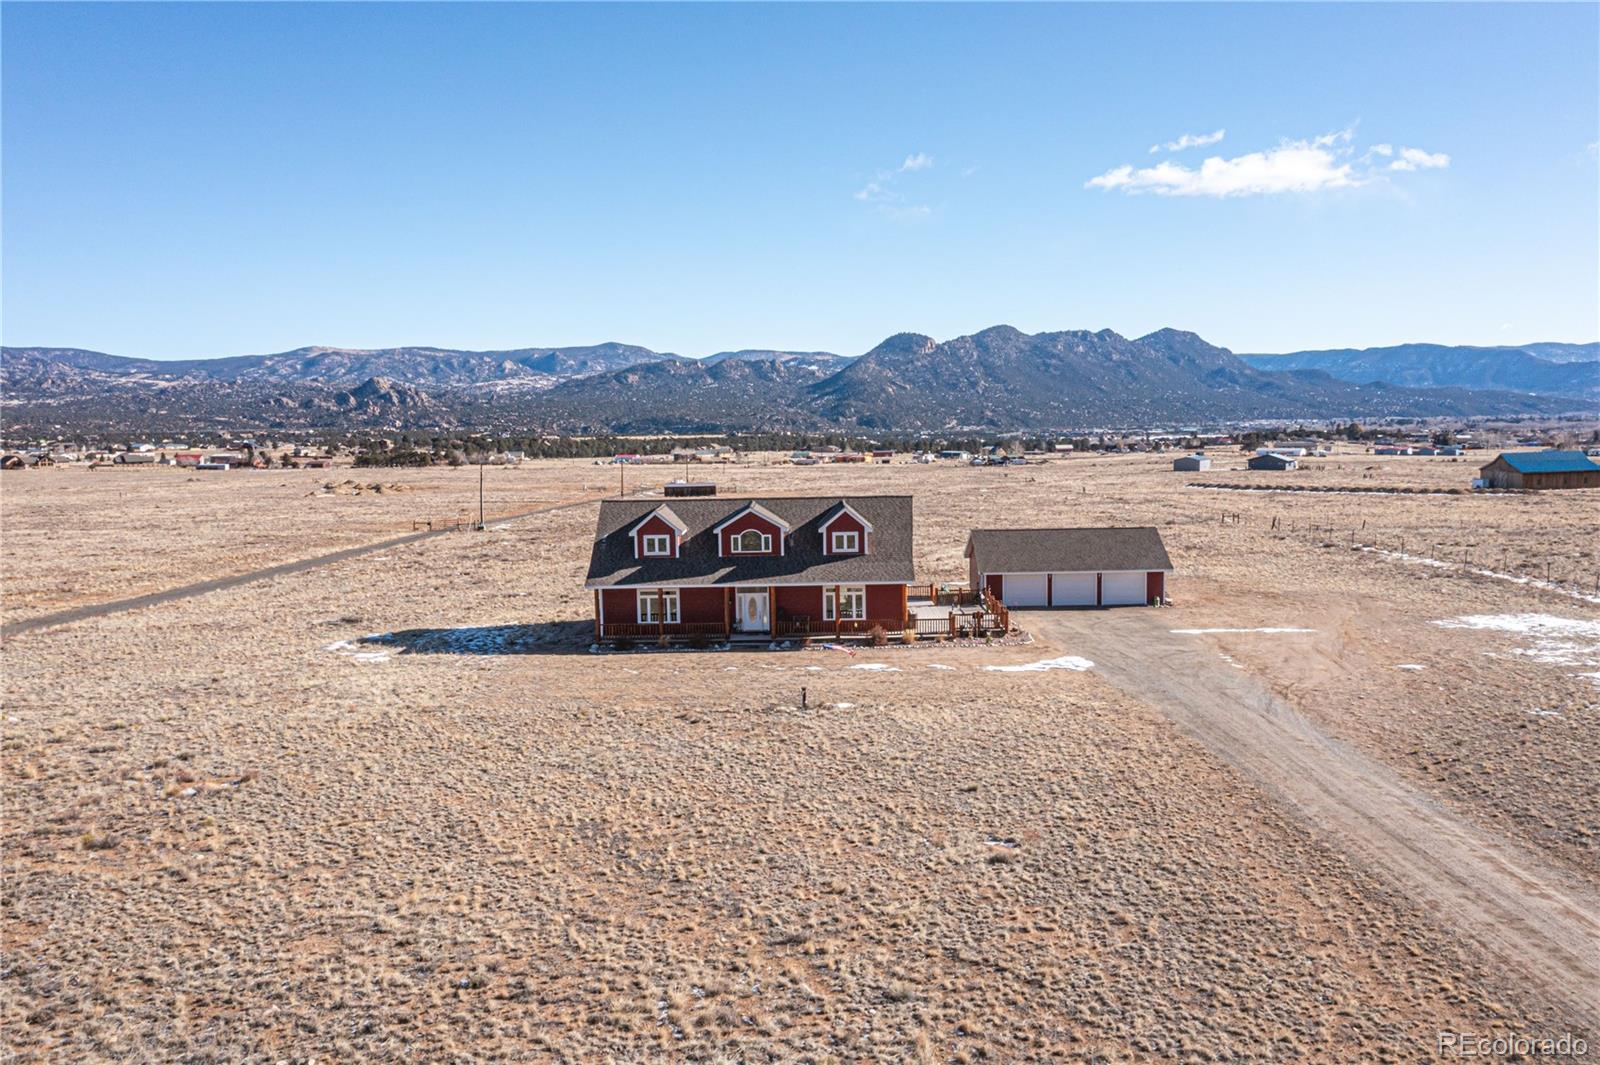 30281  county road 361 , Buena Vista sold home. Closed on 2024-04-29 for $794,000.